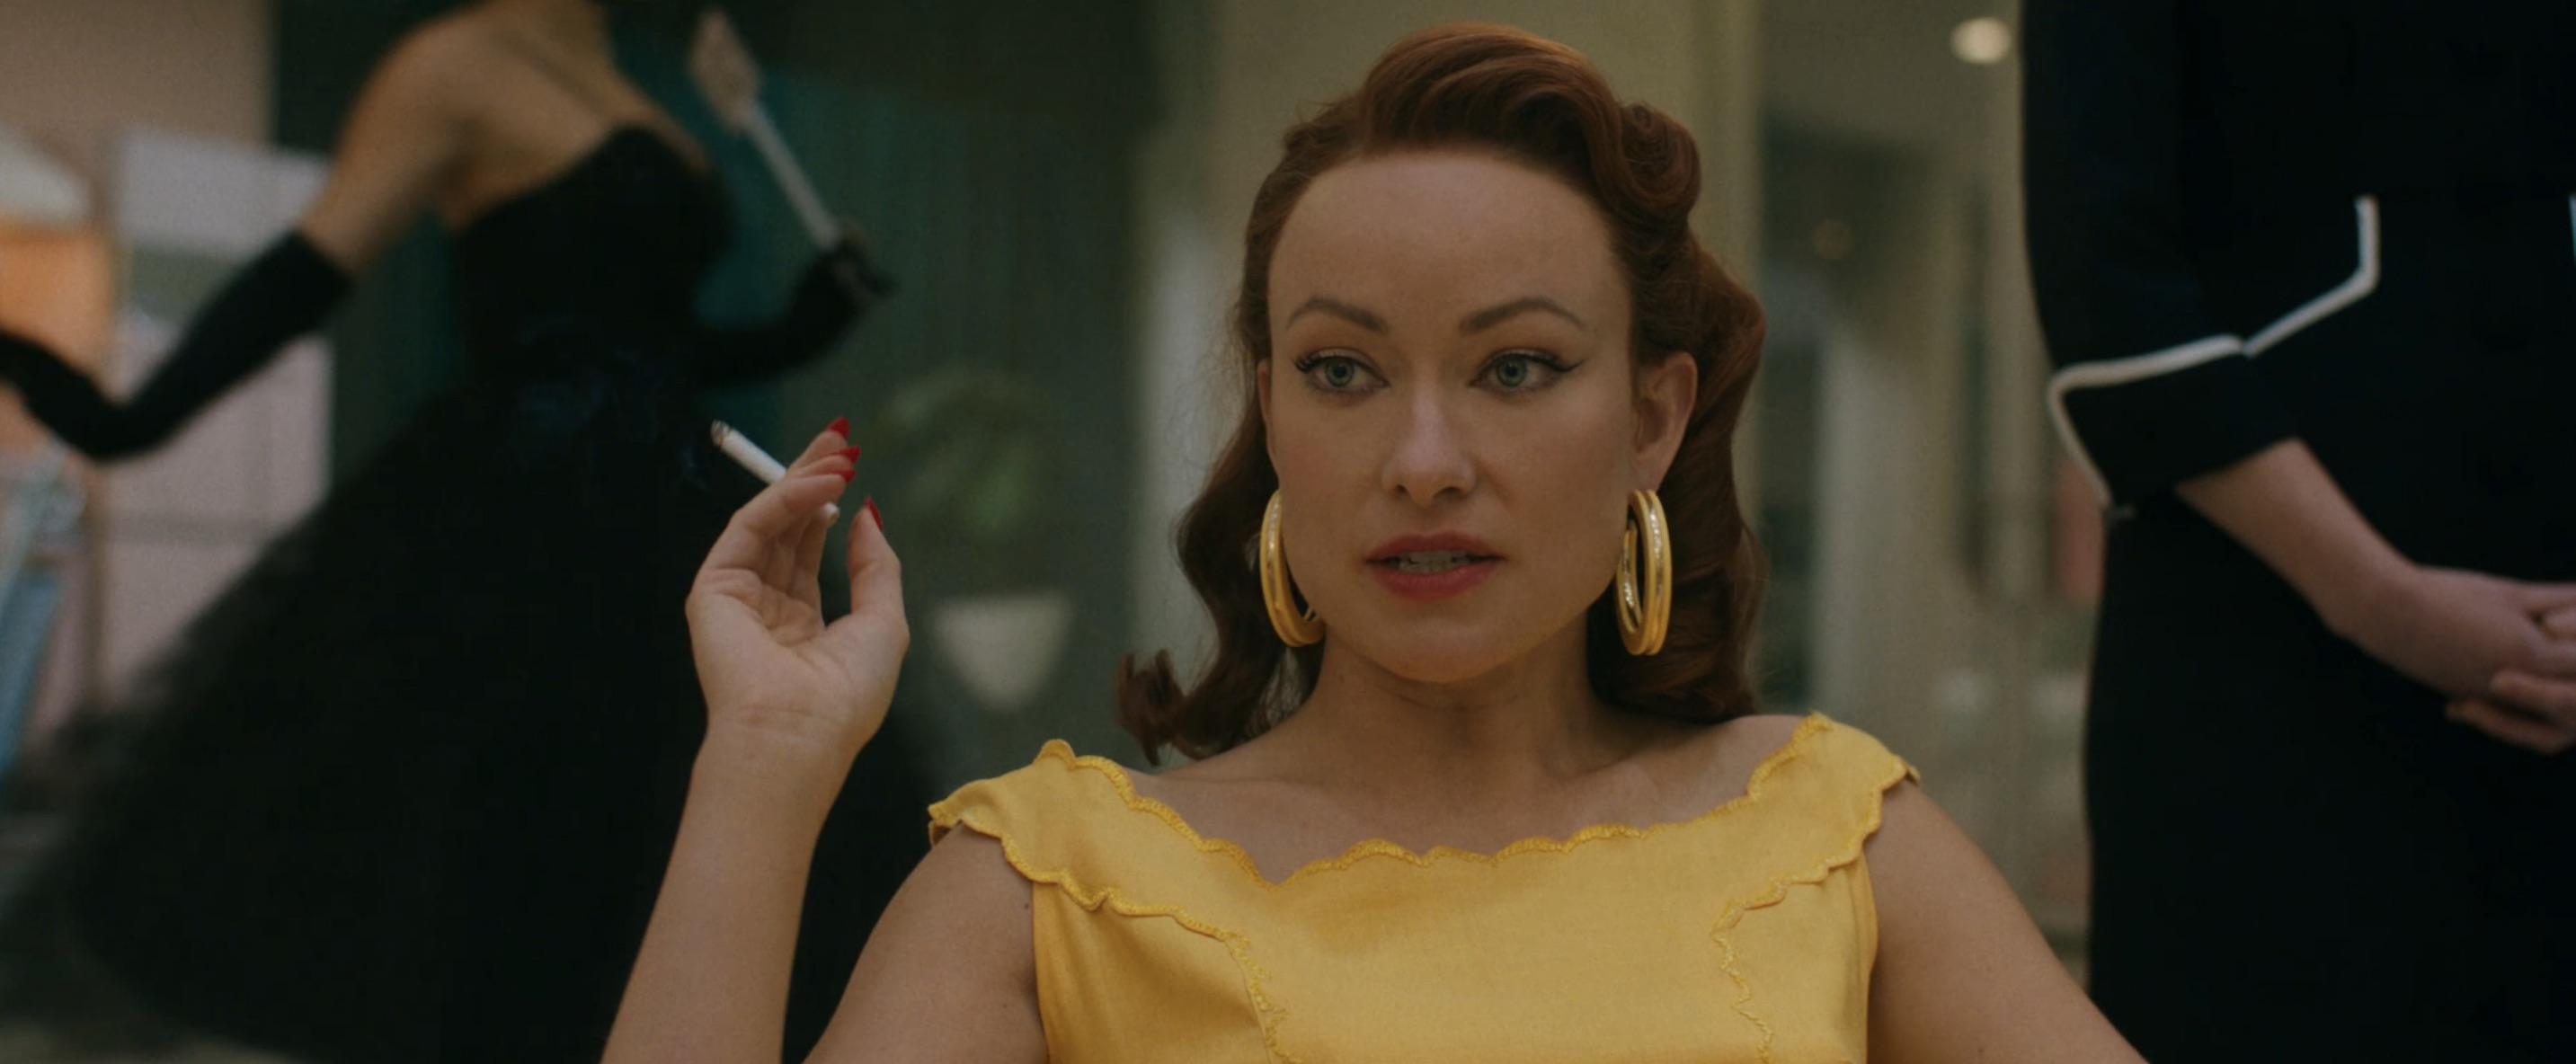 Don't Worry Darling Cast - Olivia Wilde as Bunny